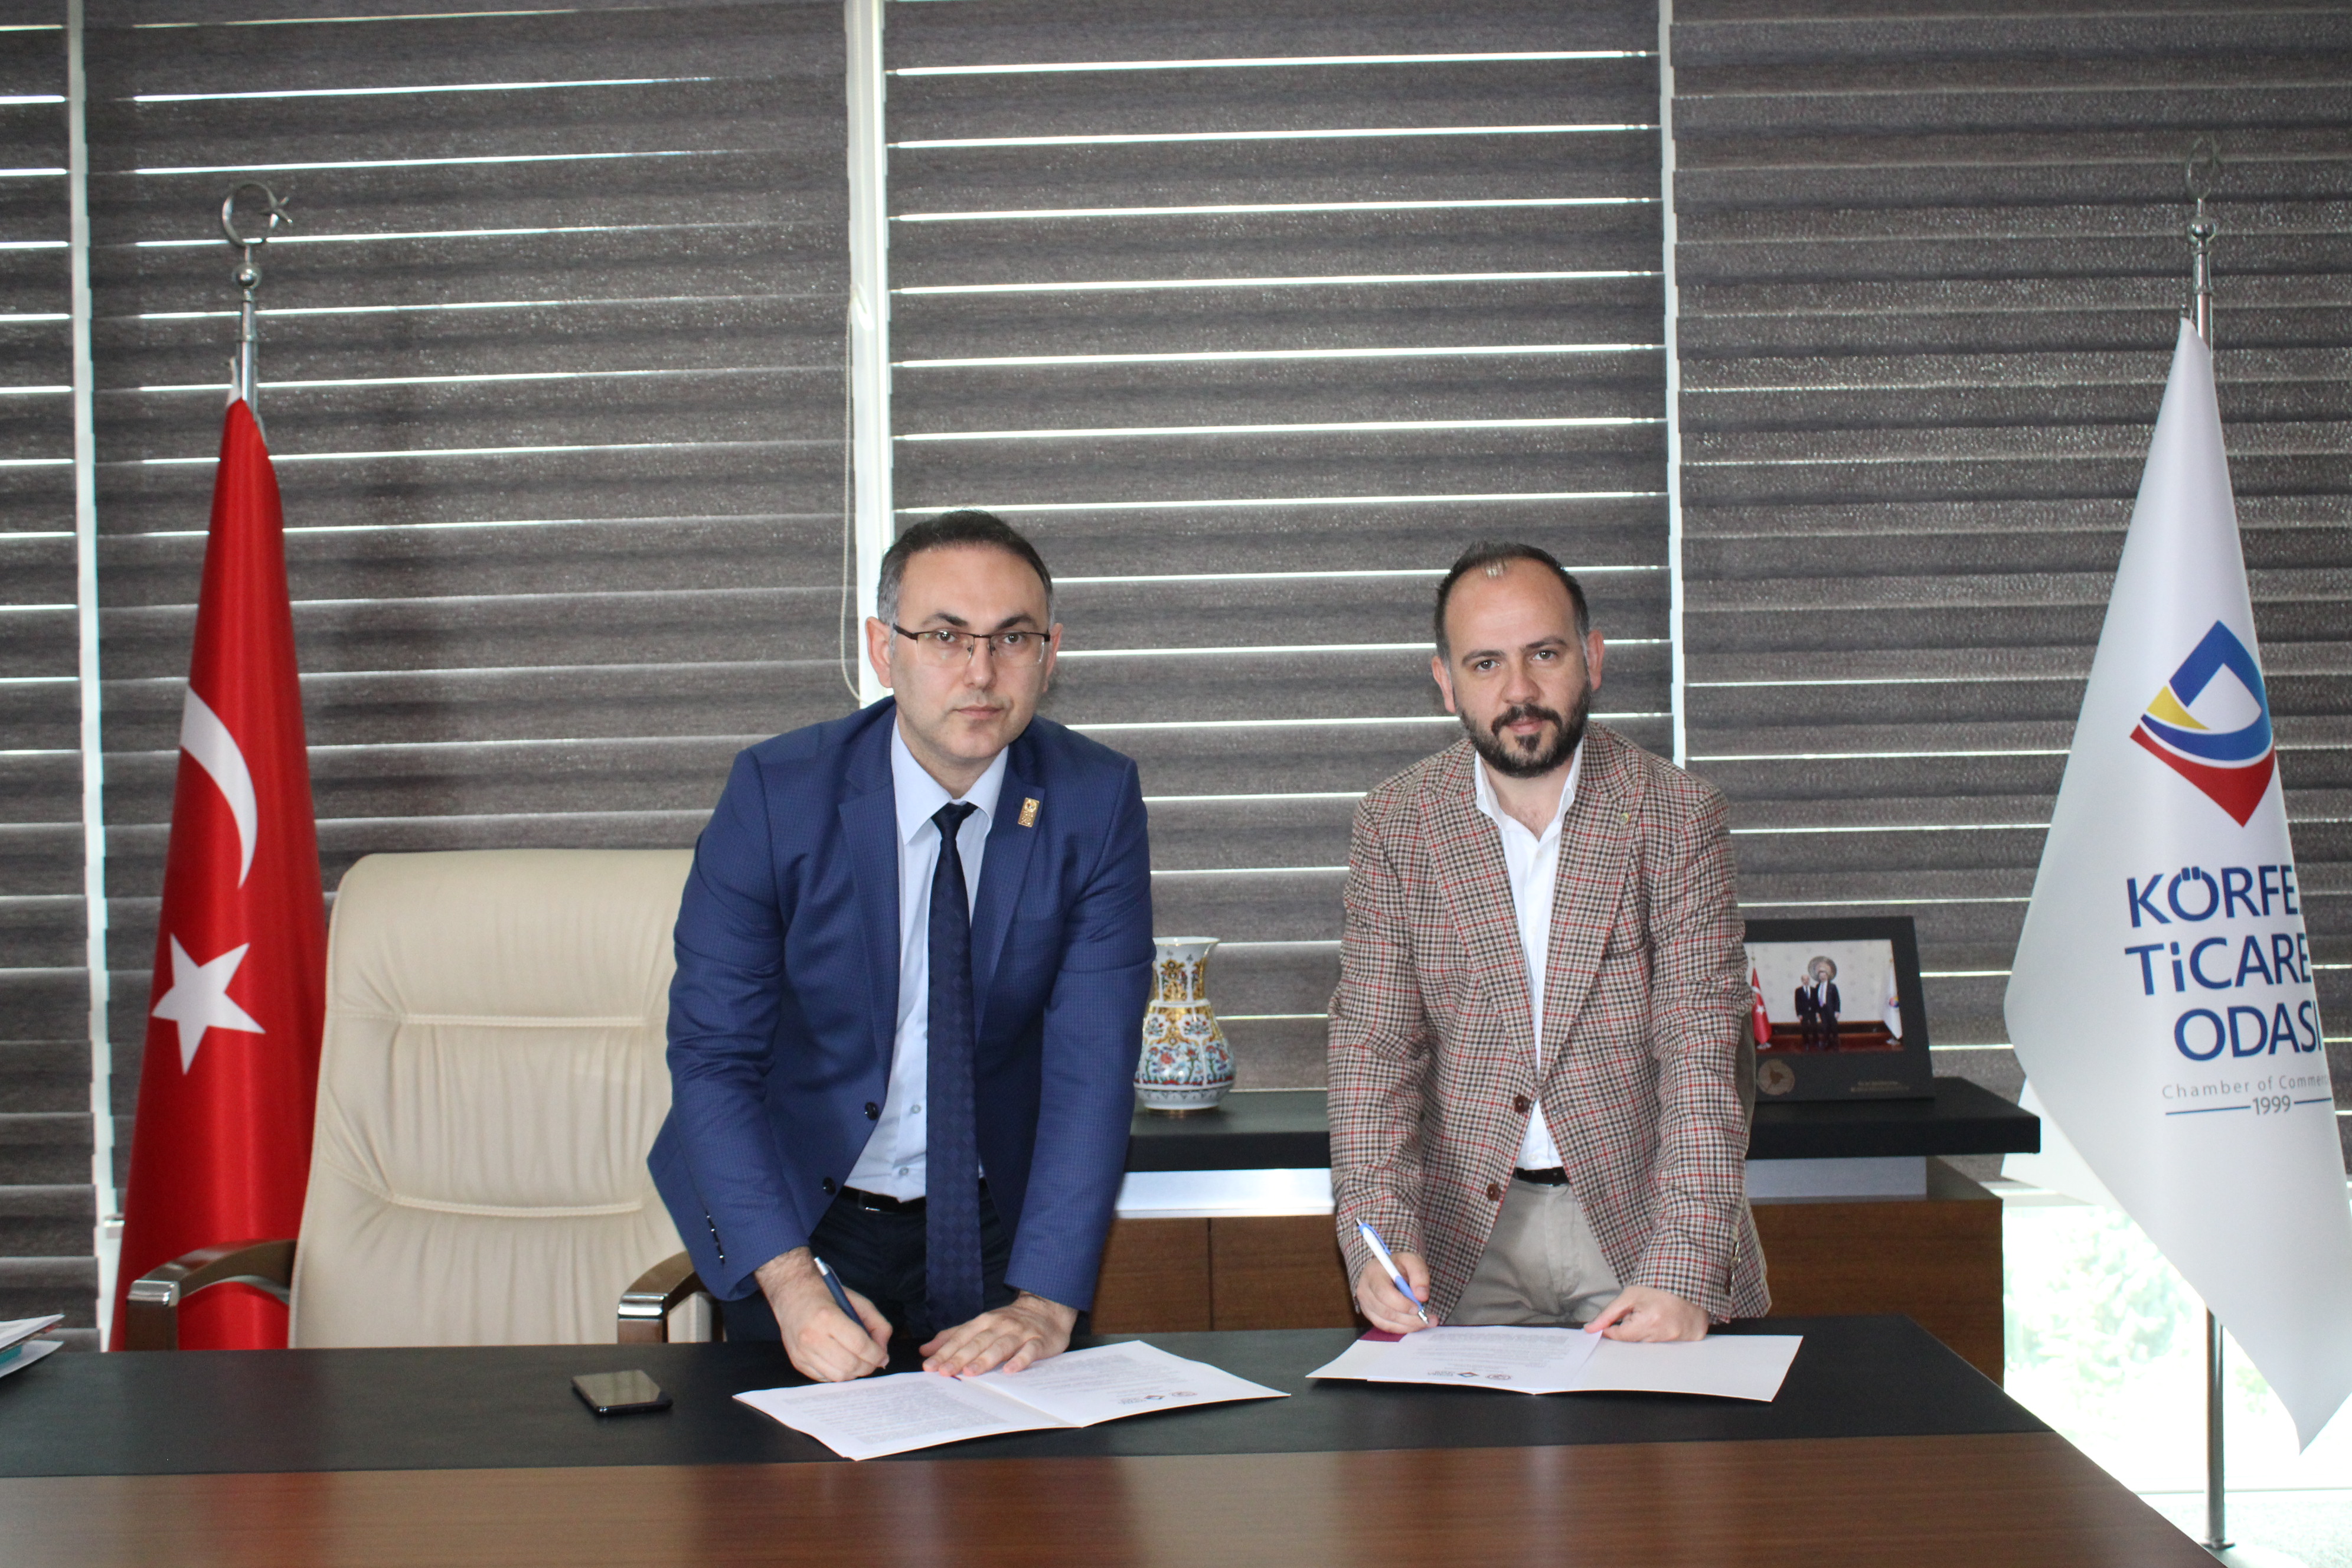 KÖRFEZ CHAMBER OF COMMERCE EXPANDED ITS COOPERATION WITH GEDIK UNIVERSITY